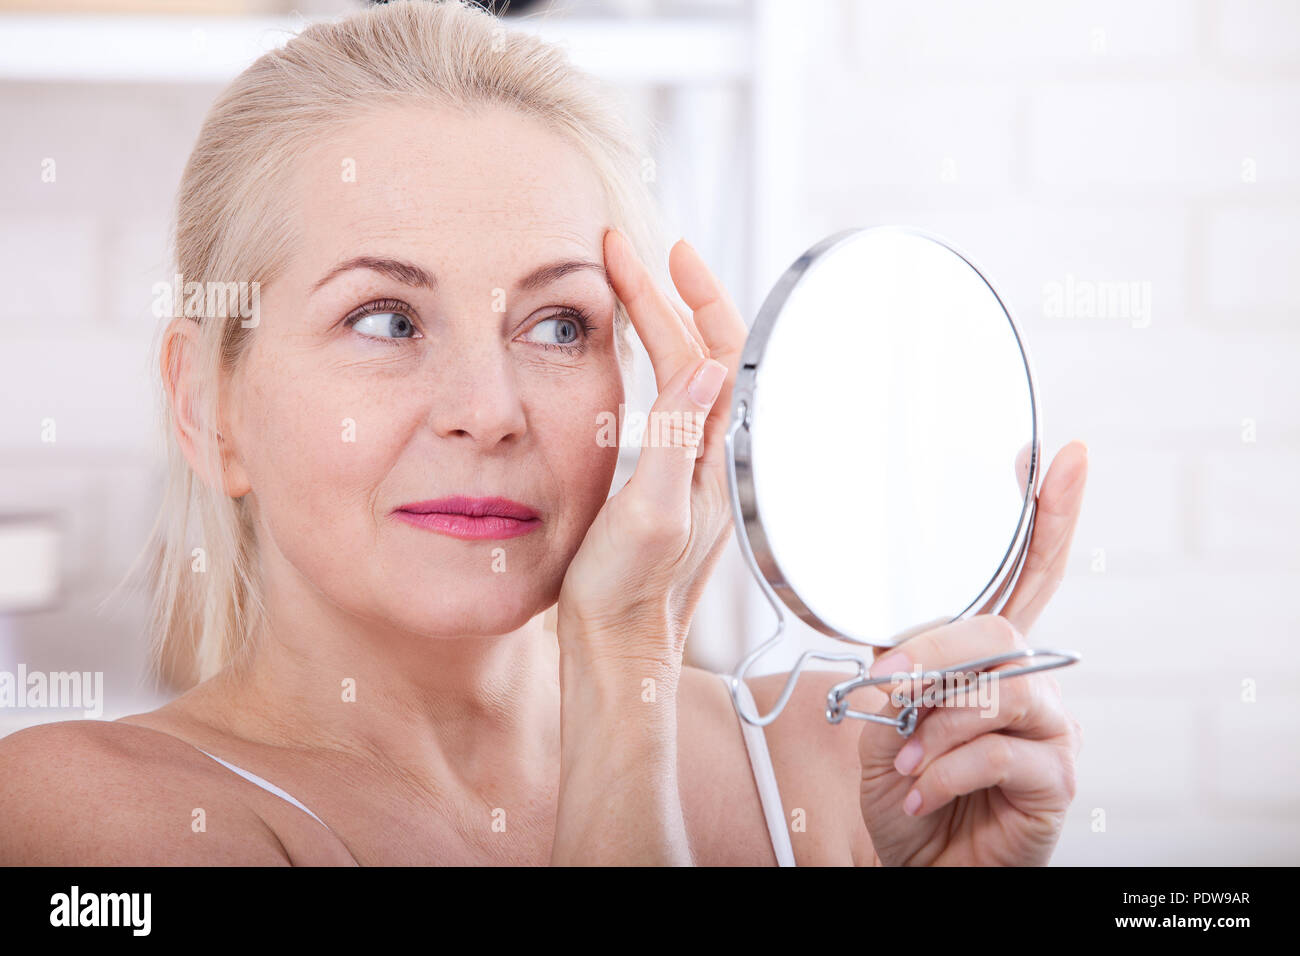 Forty years old woman looking at wrinkles in mirror. Plastic surgery and collagen injections. Makeup. Macro face. Selective focus on the face Stock Photo